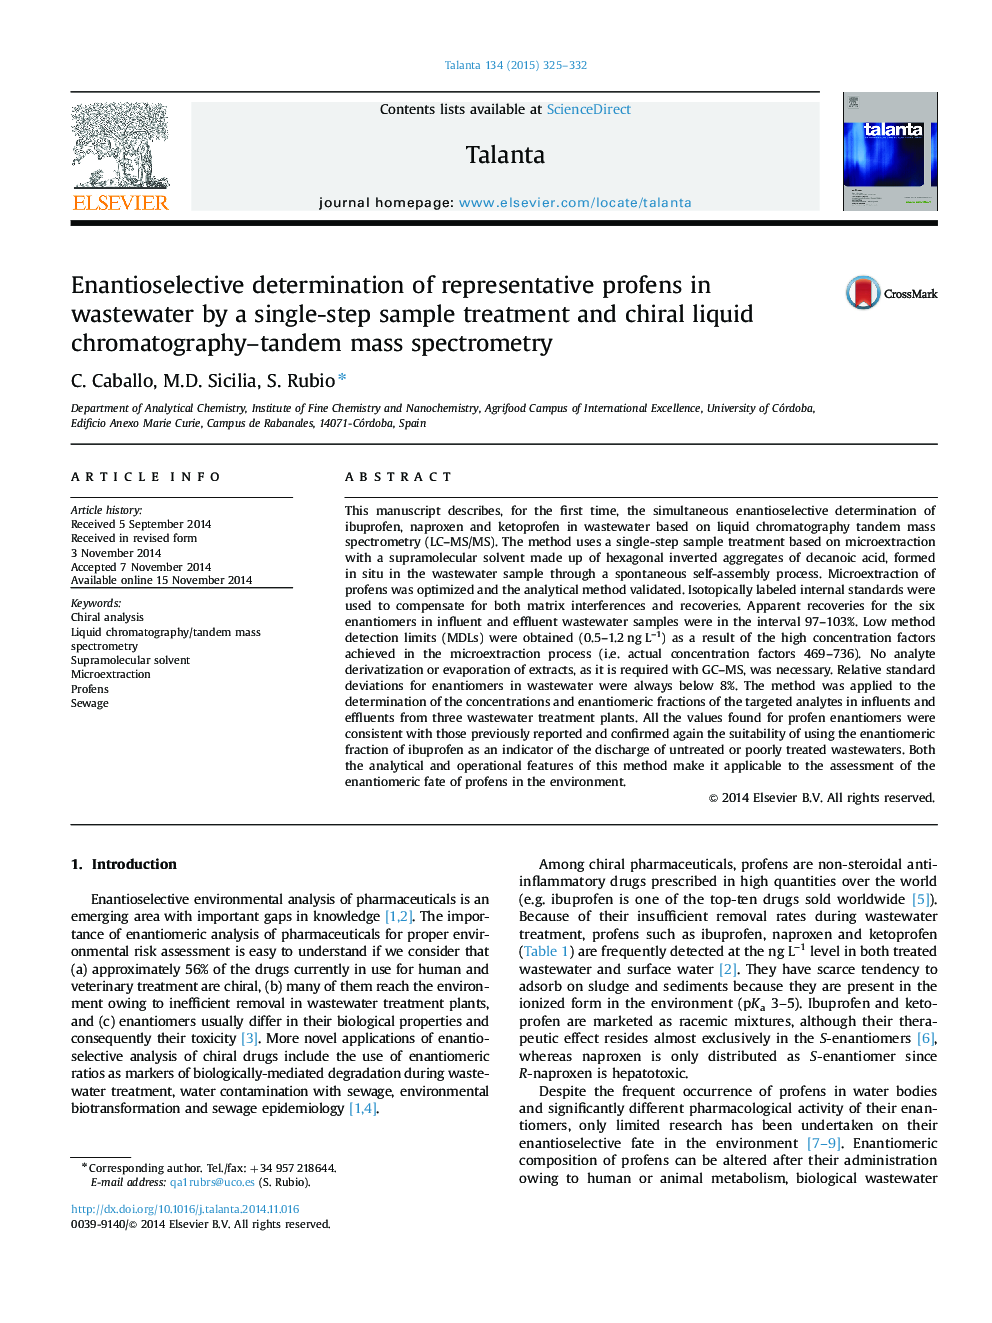 Enantioselective determination of representative profens in wastewater by a single-step sample treatment and chiral liquid chromatography–tandem mass spectrometry